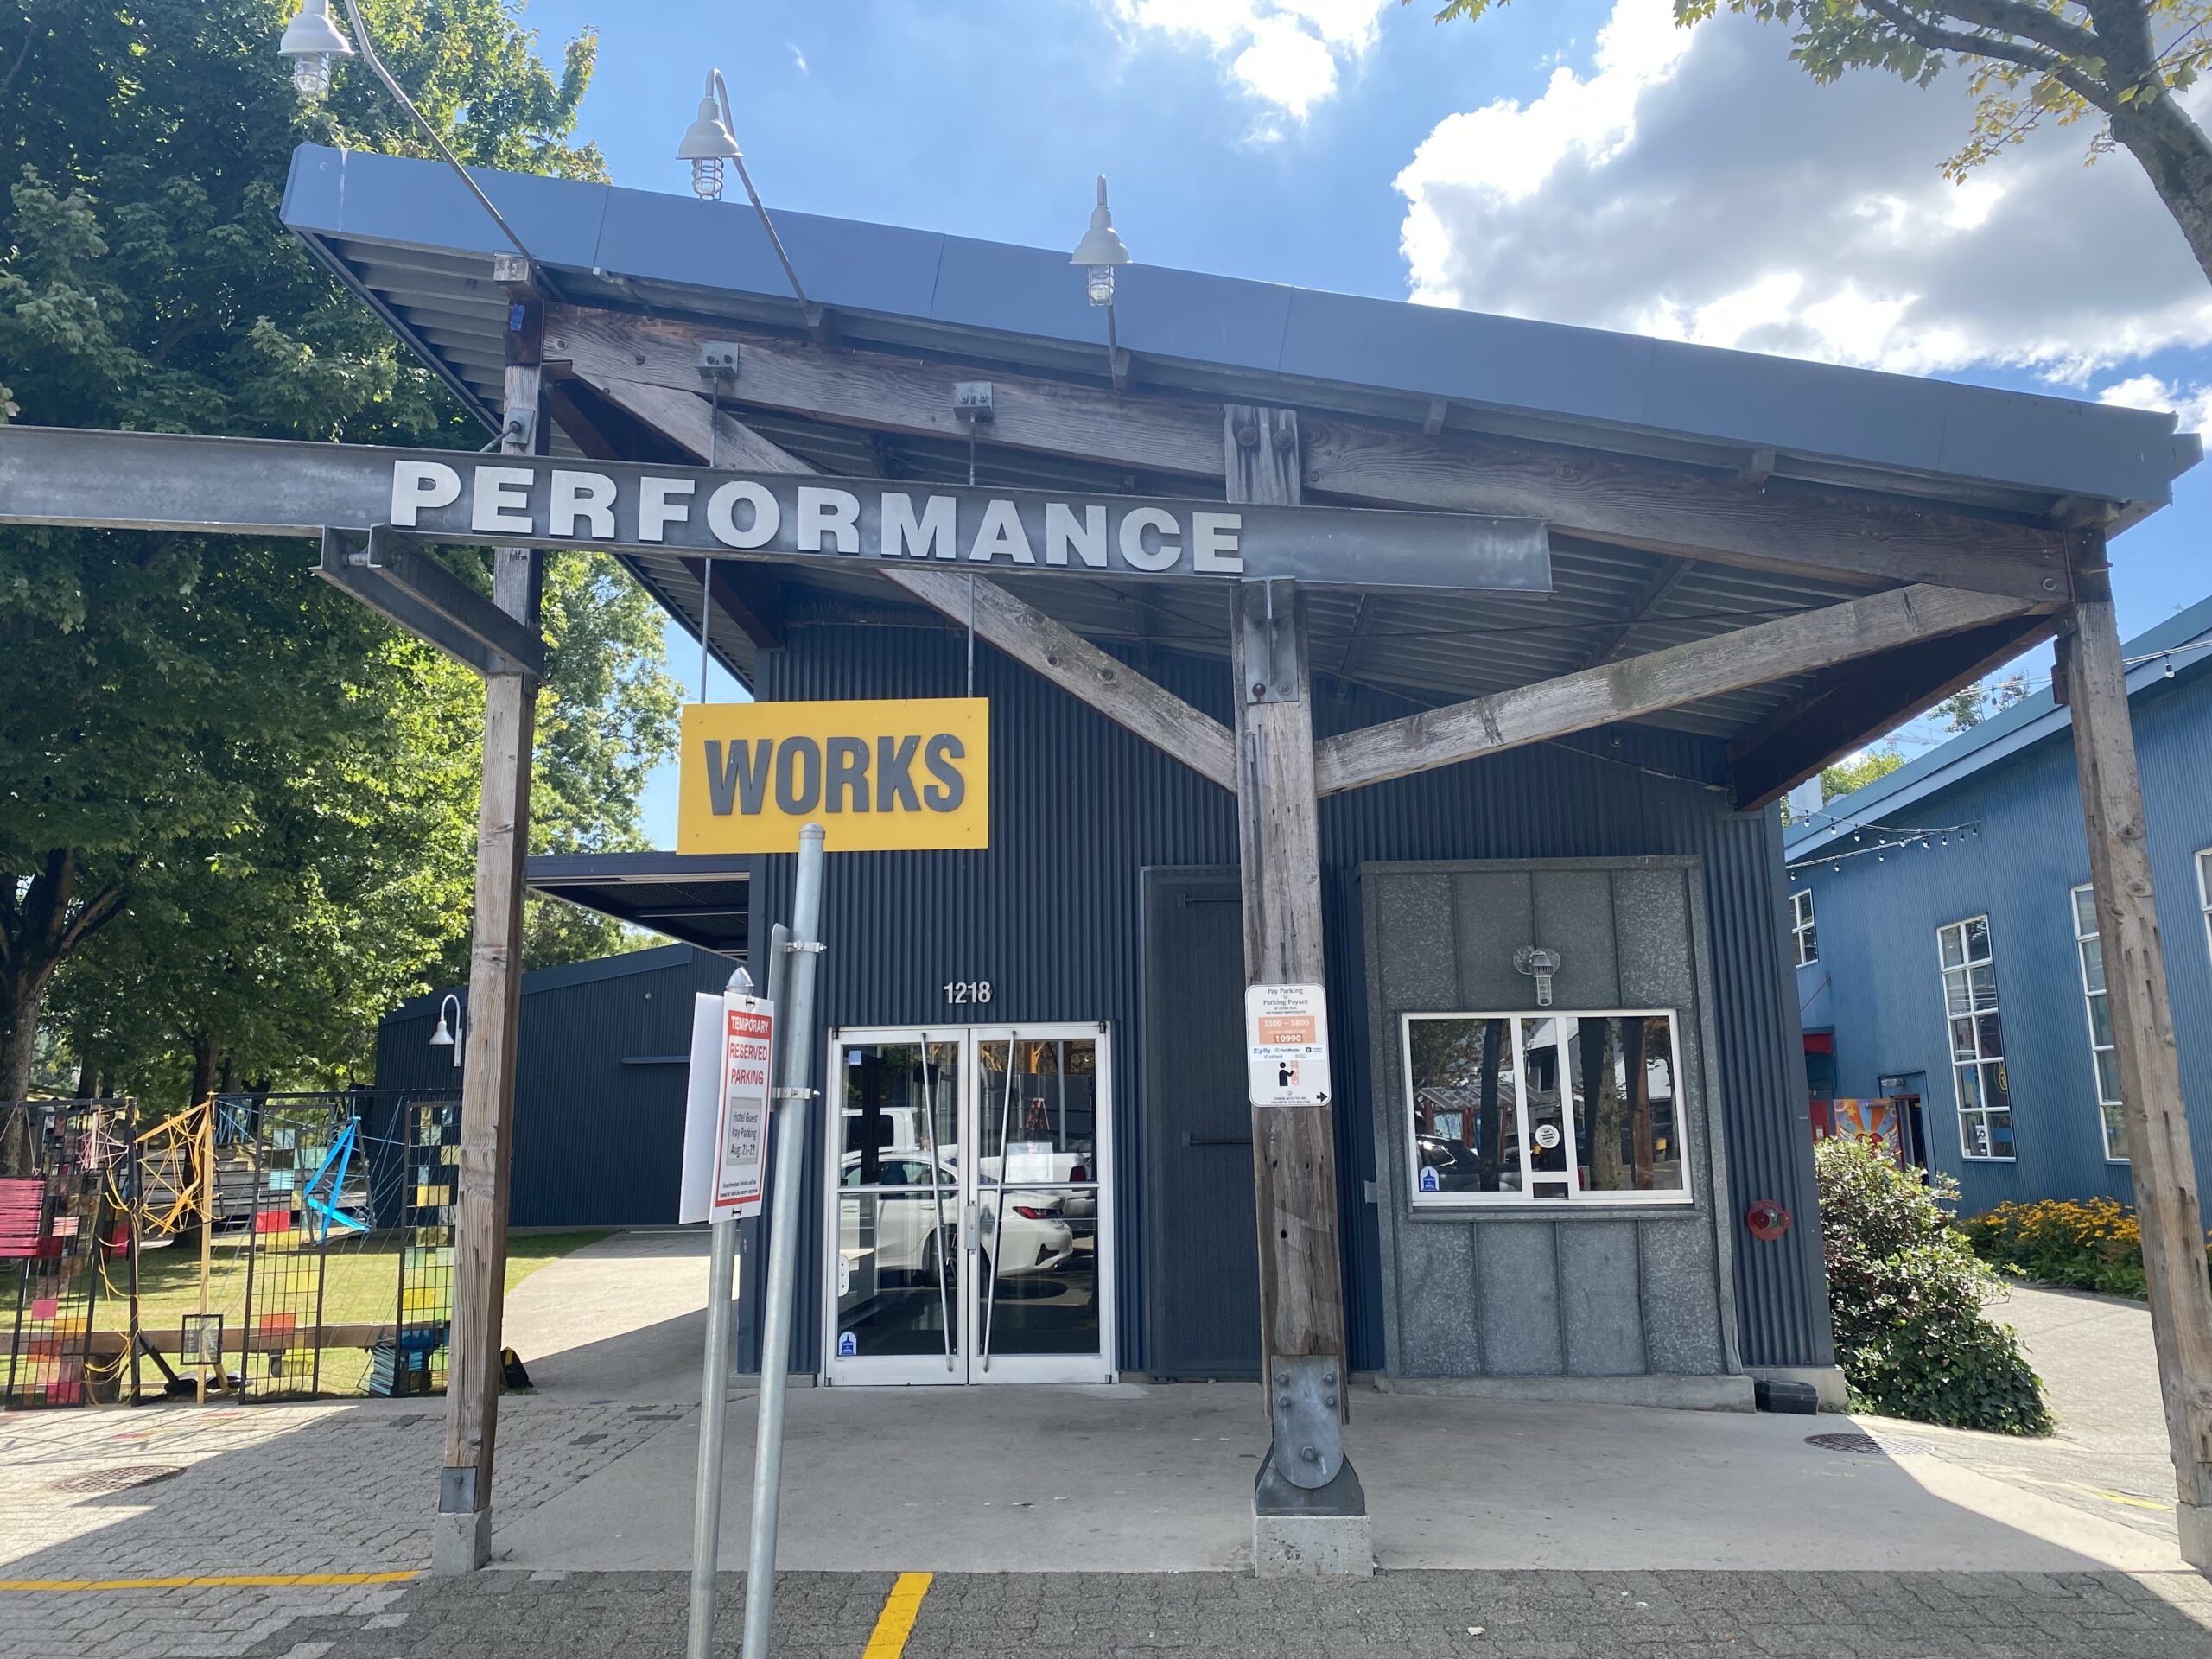 The exterior, front view of Performance Works.